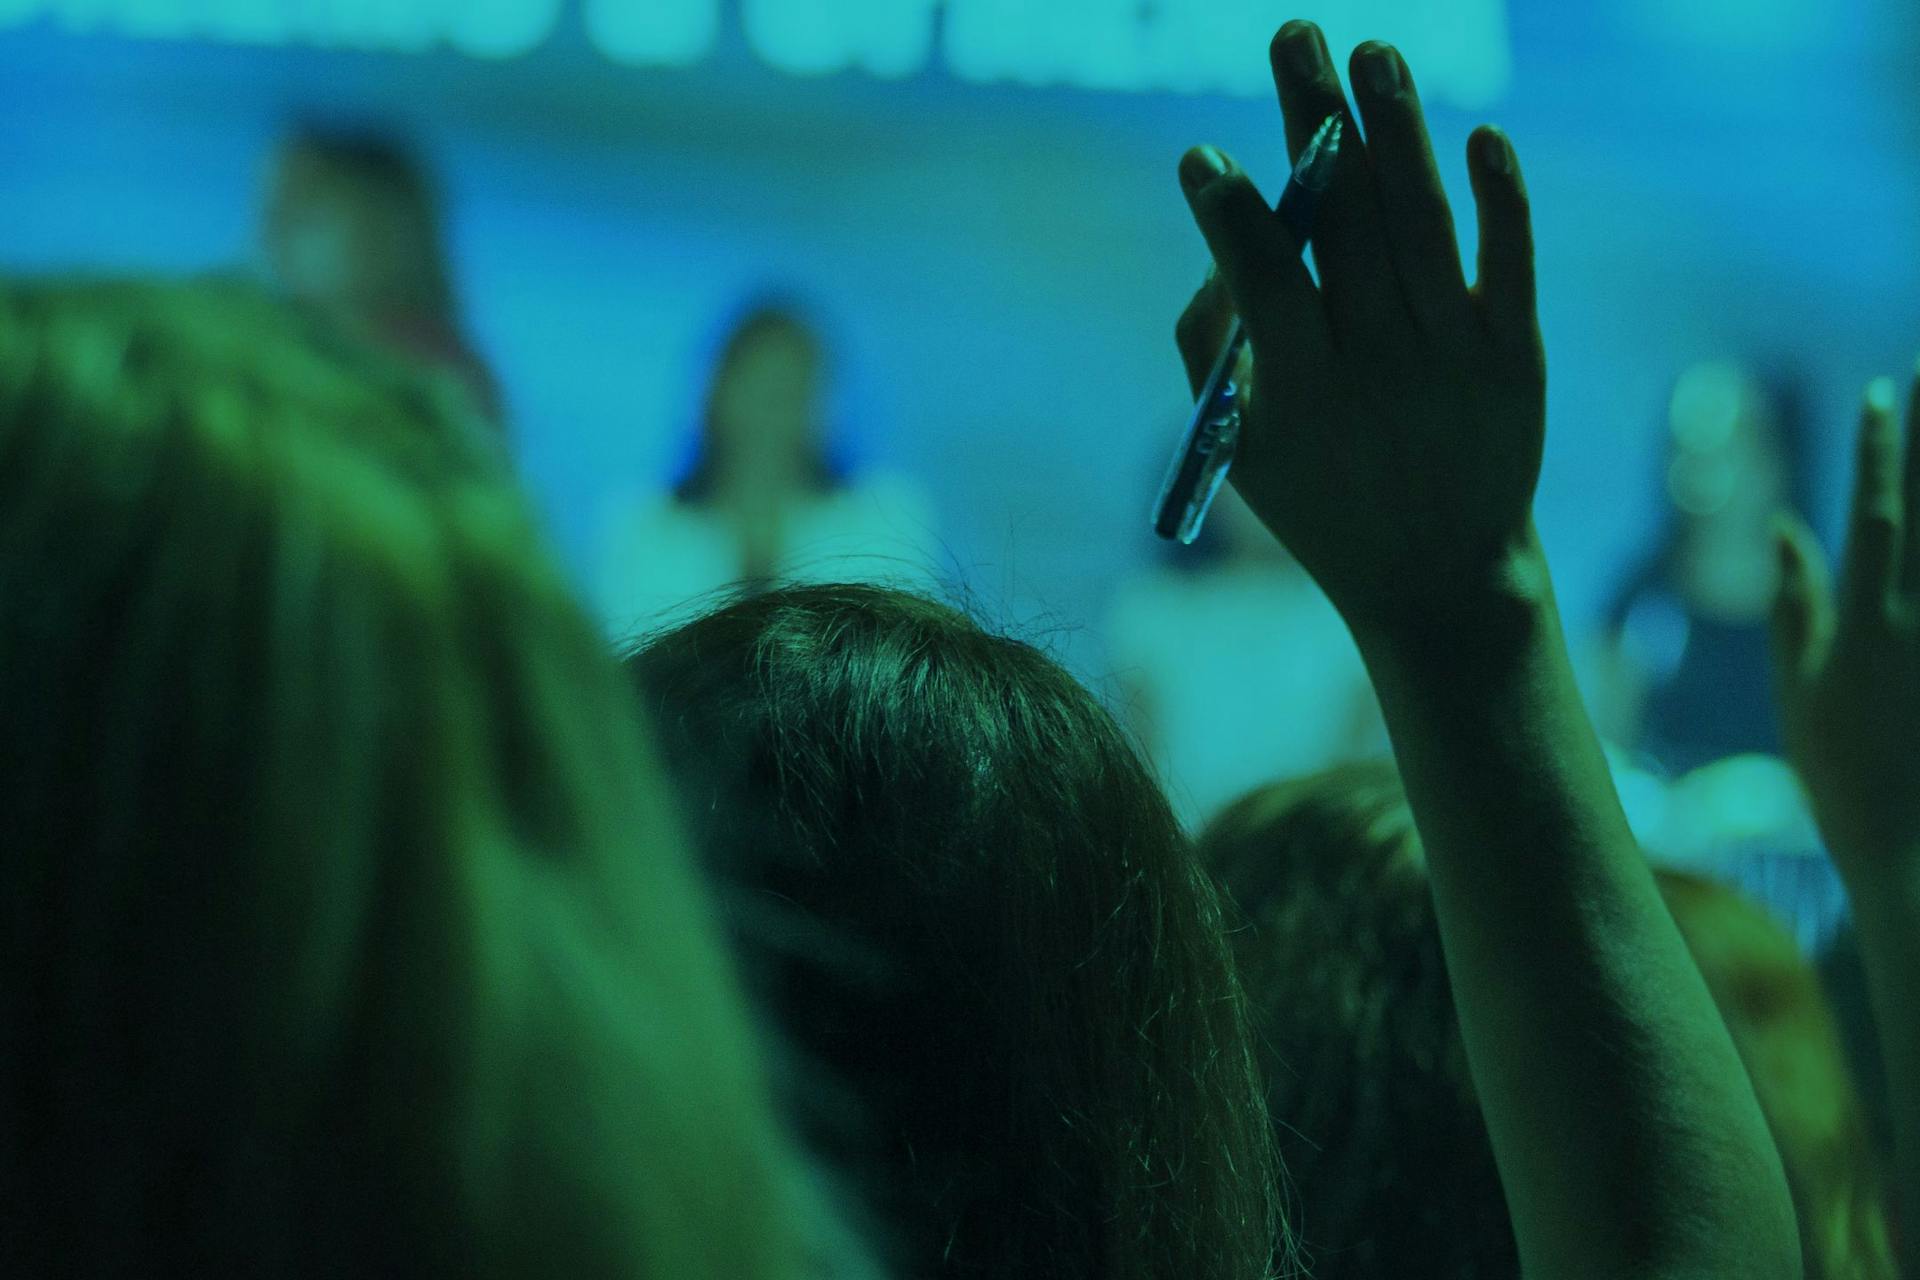 Close up of a girl with a raised hand. The image has a blue undertone